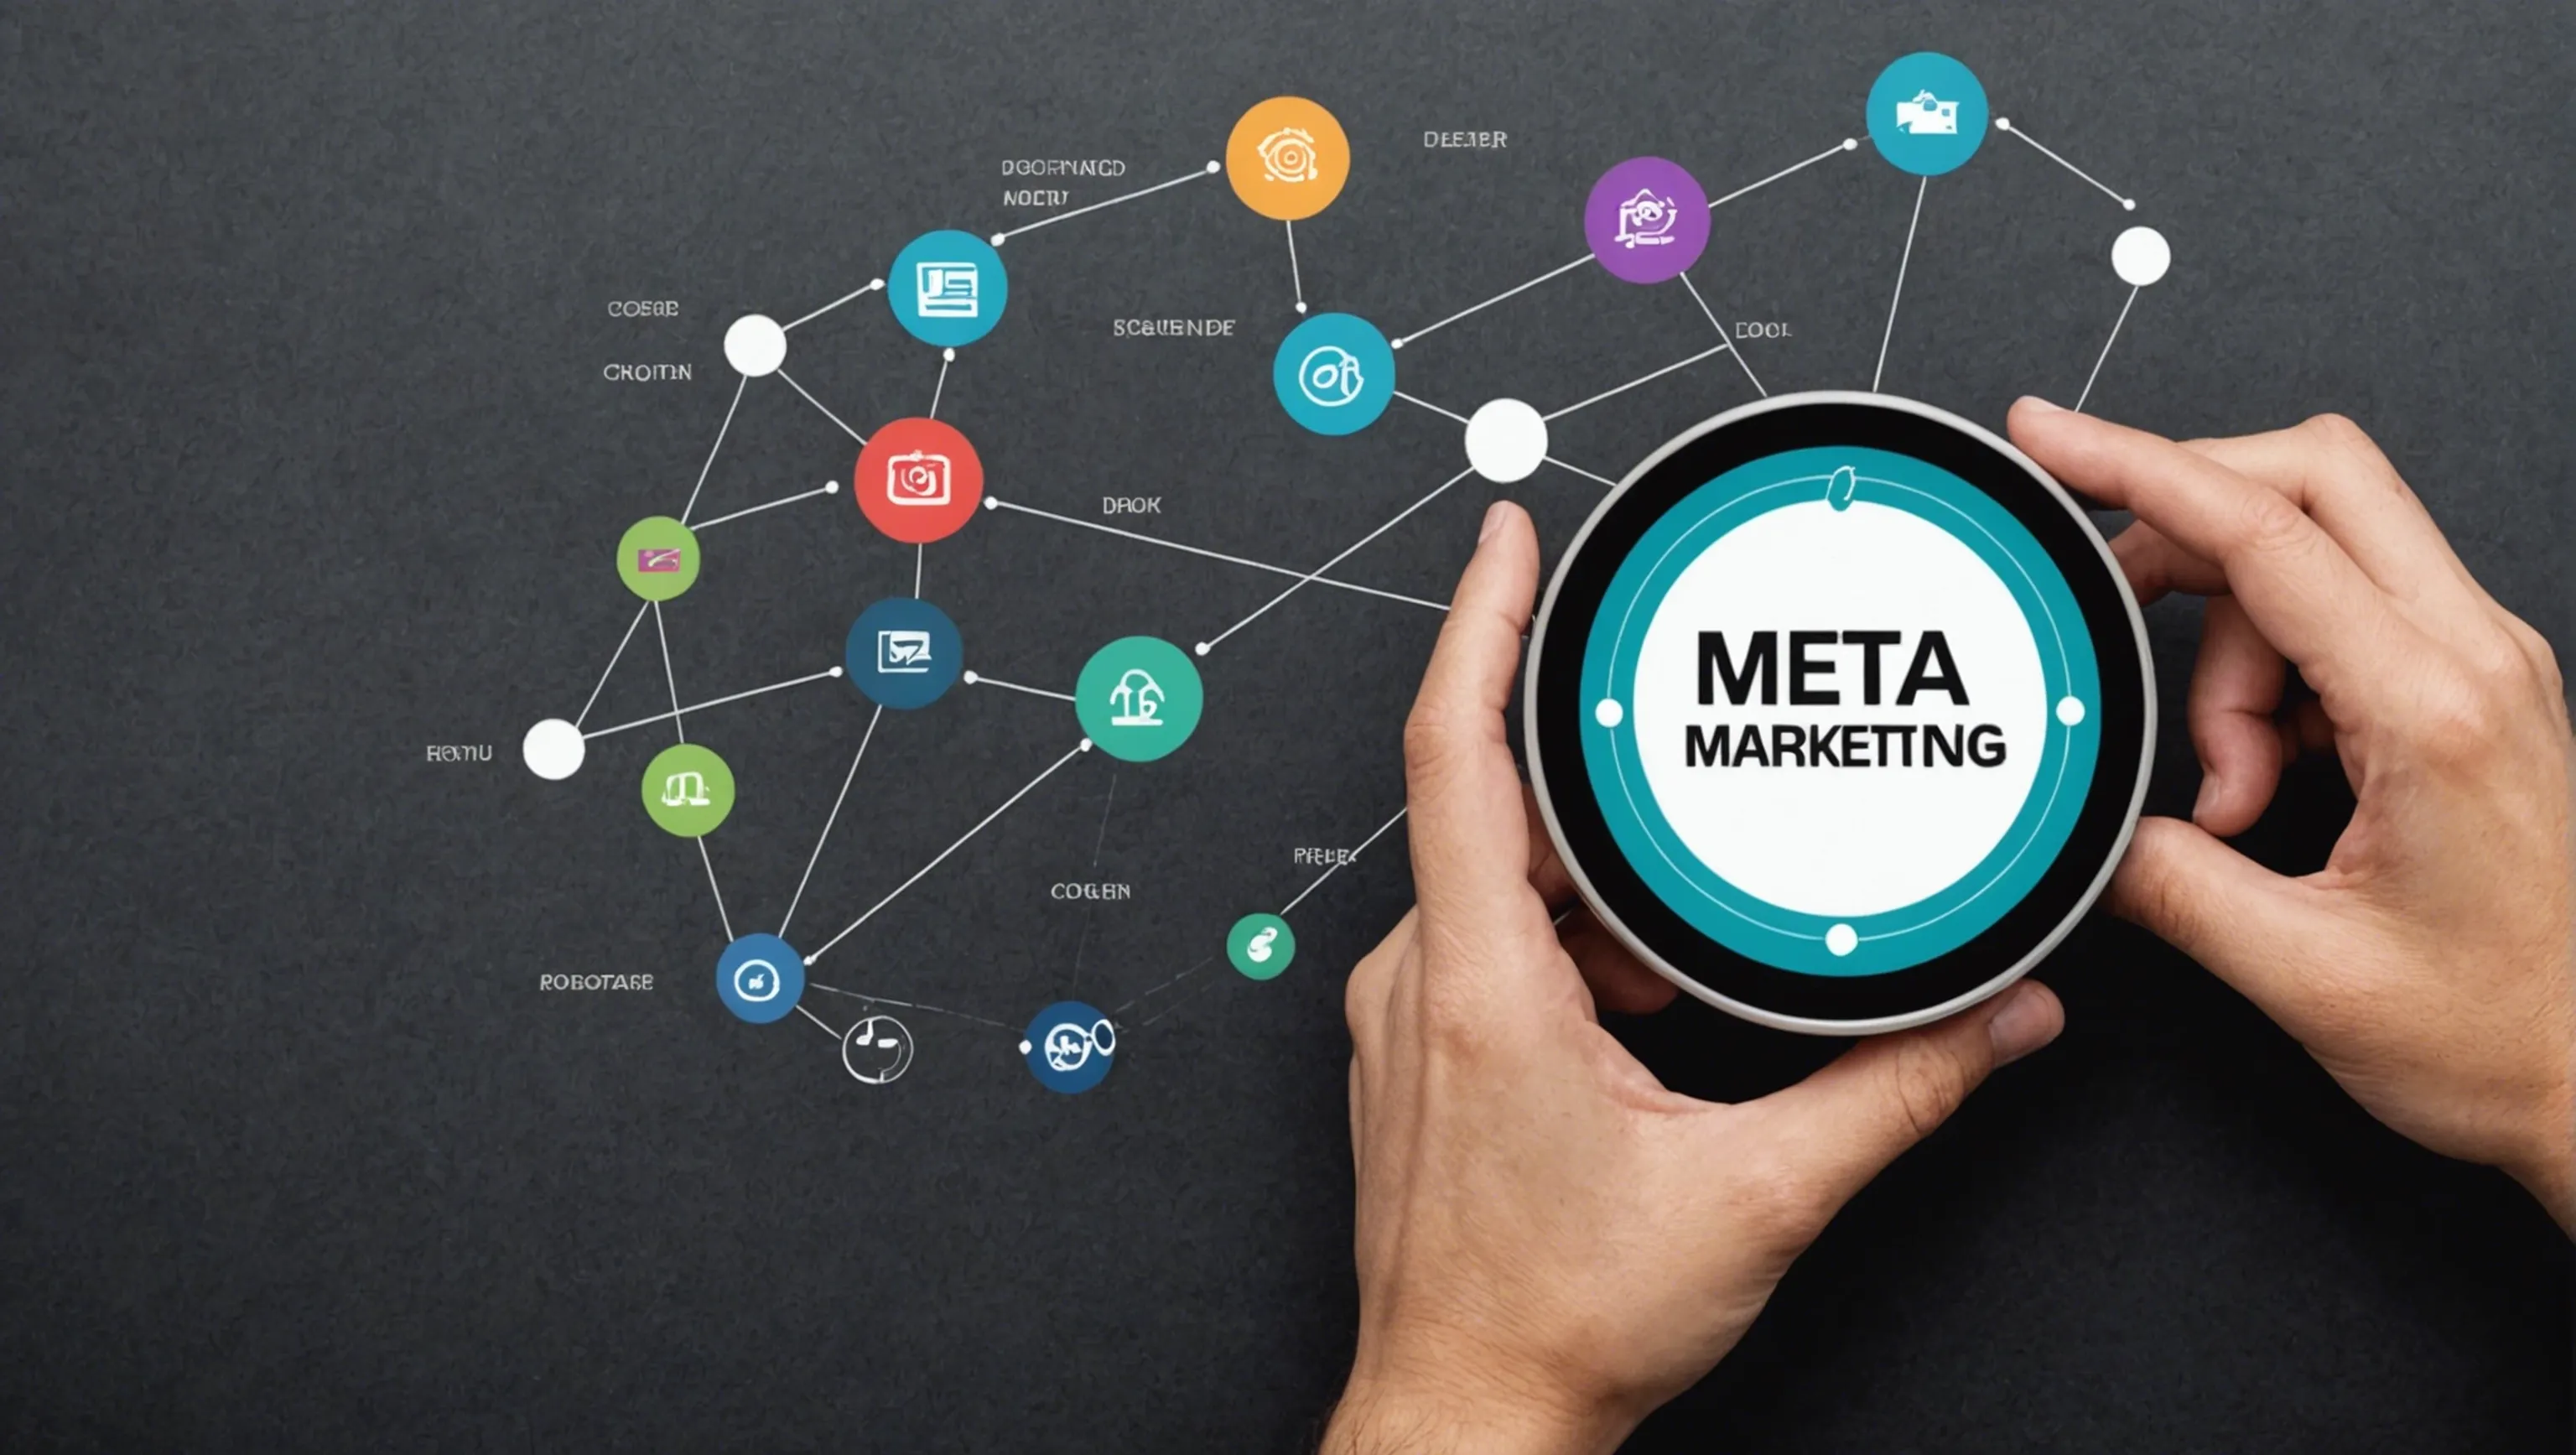 Meta tags and click-through rates in digital marketing